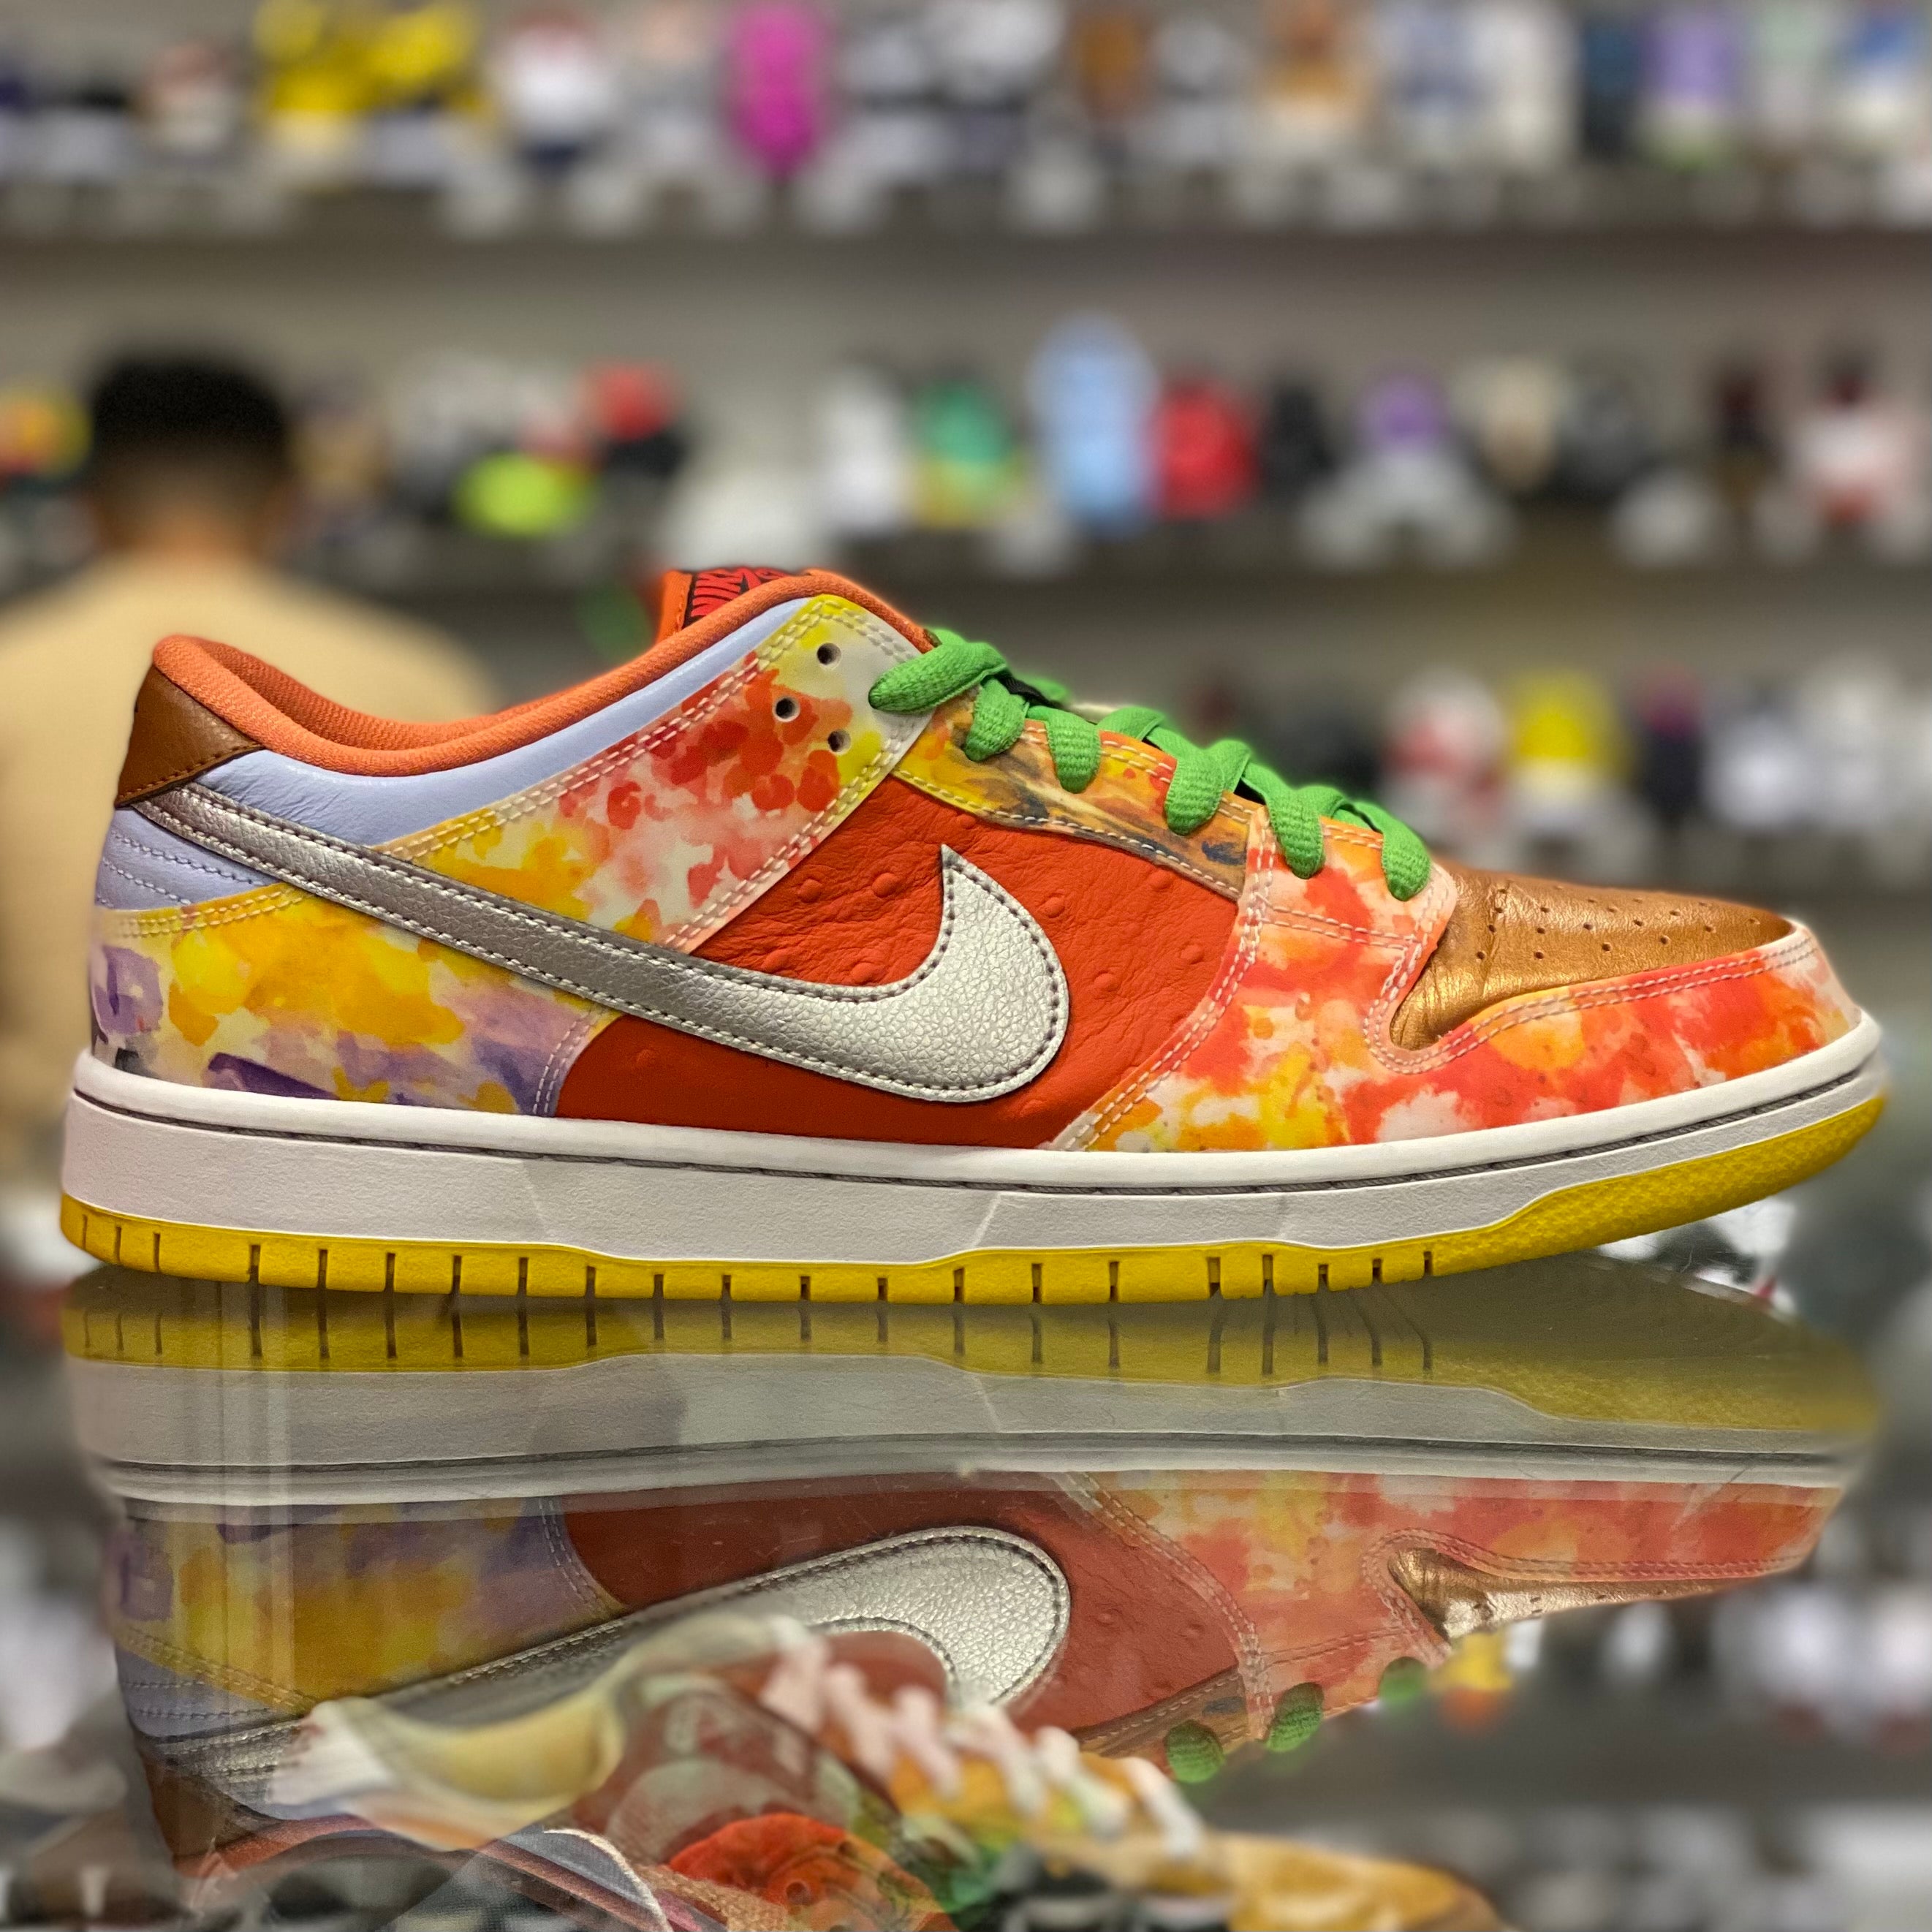 Nike SB Dunk Low Street Hawker (2021) are available in-store and